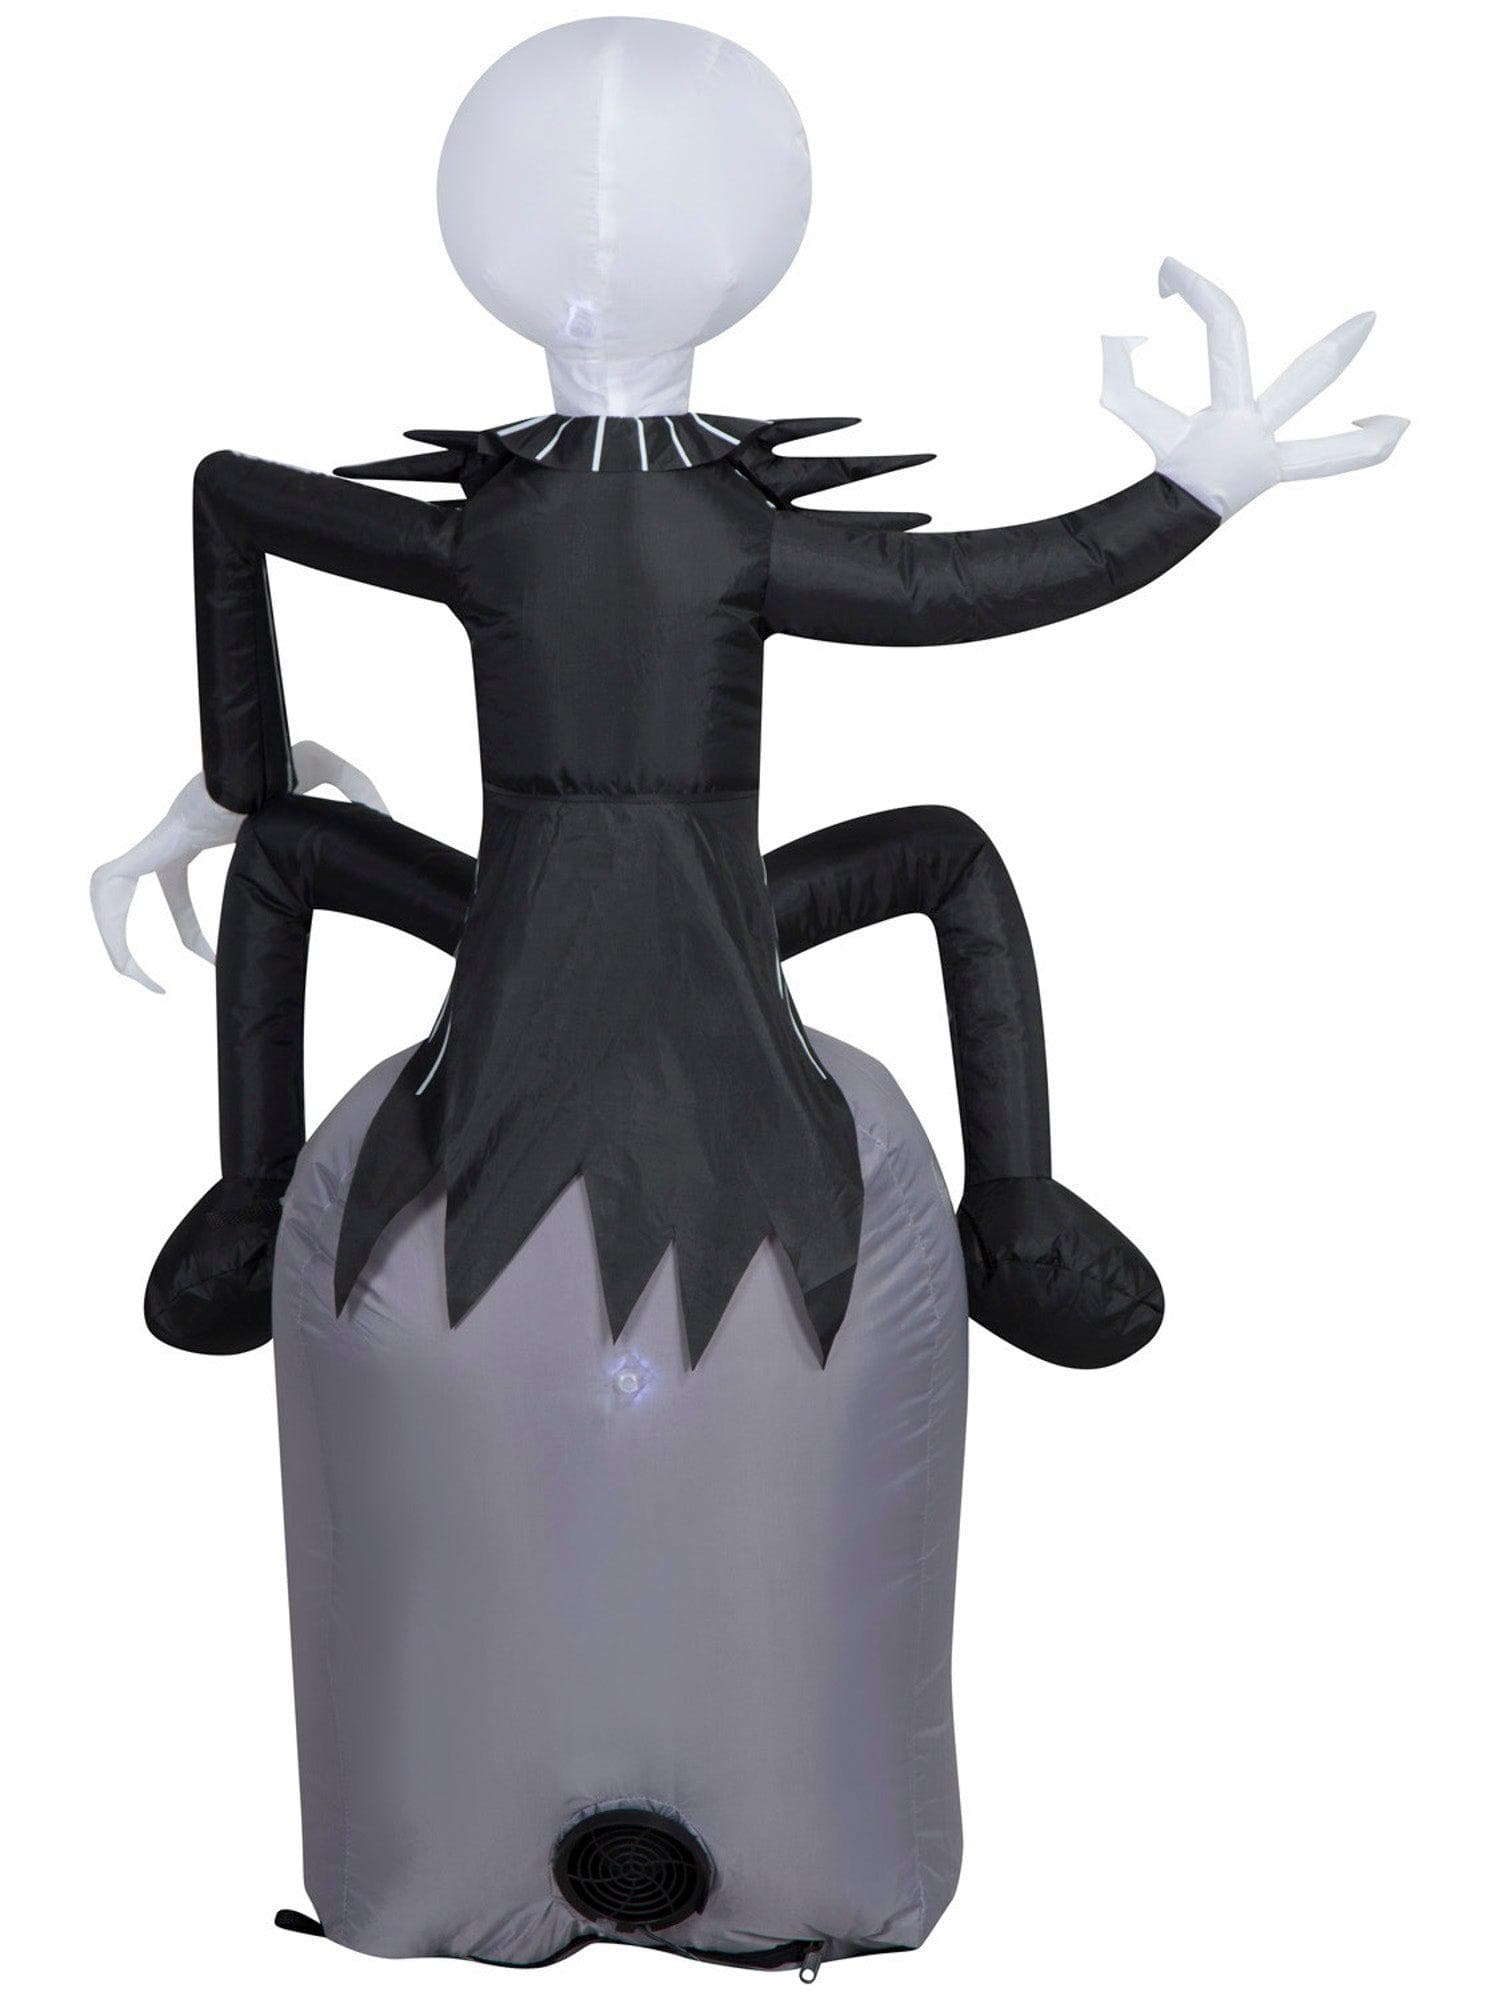 3.5 Foot The Nightmare Before Christmas Jack Skellington Light Up Halloween Inflatable Lawn Decor - costumes.com